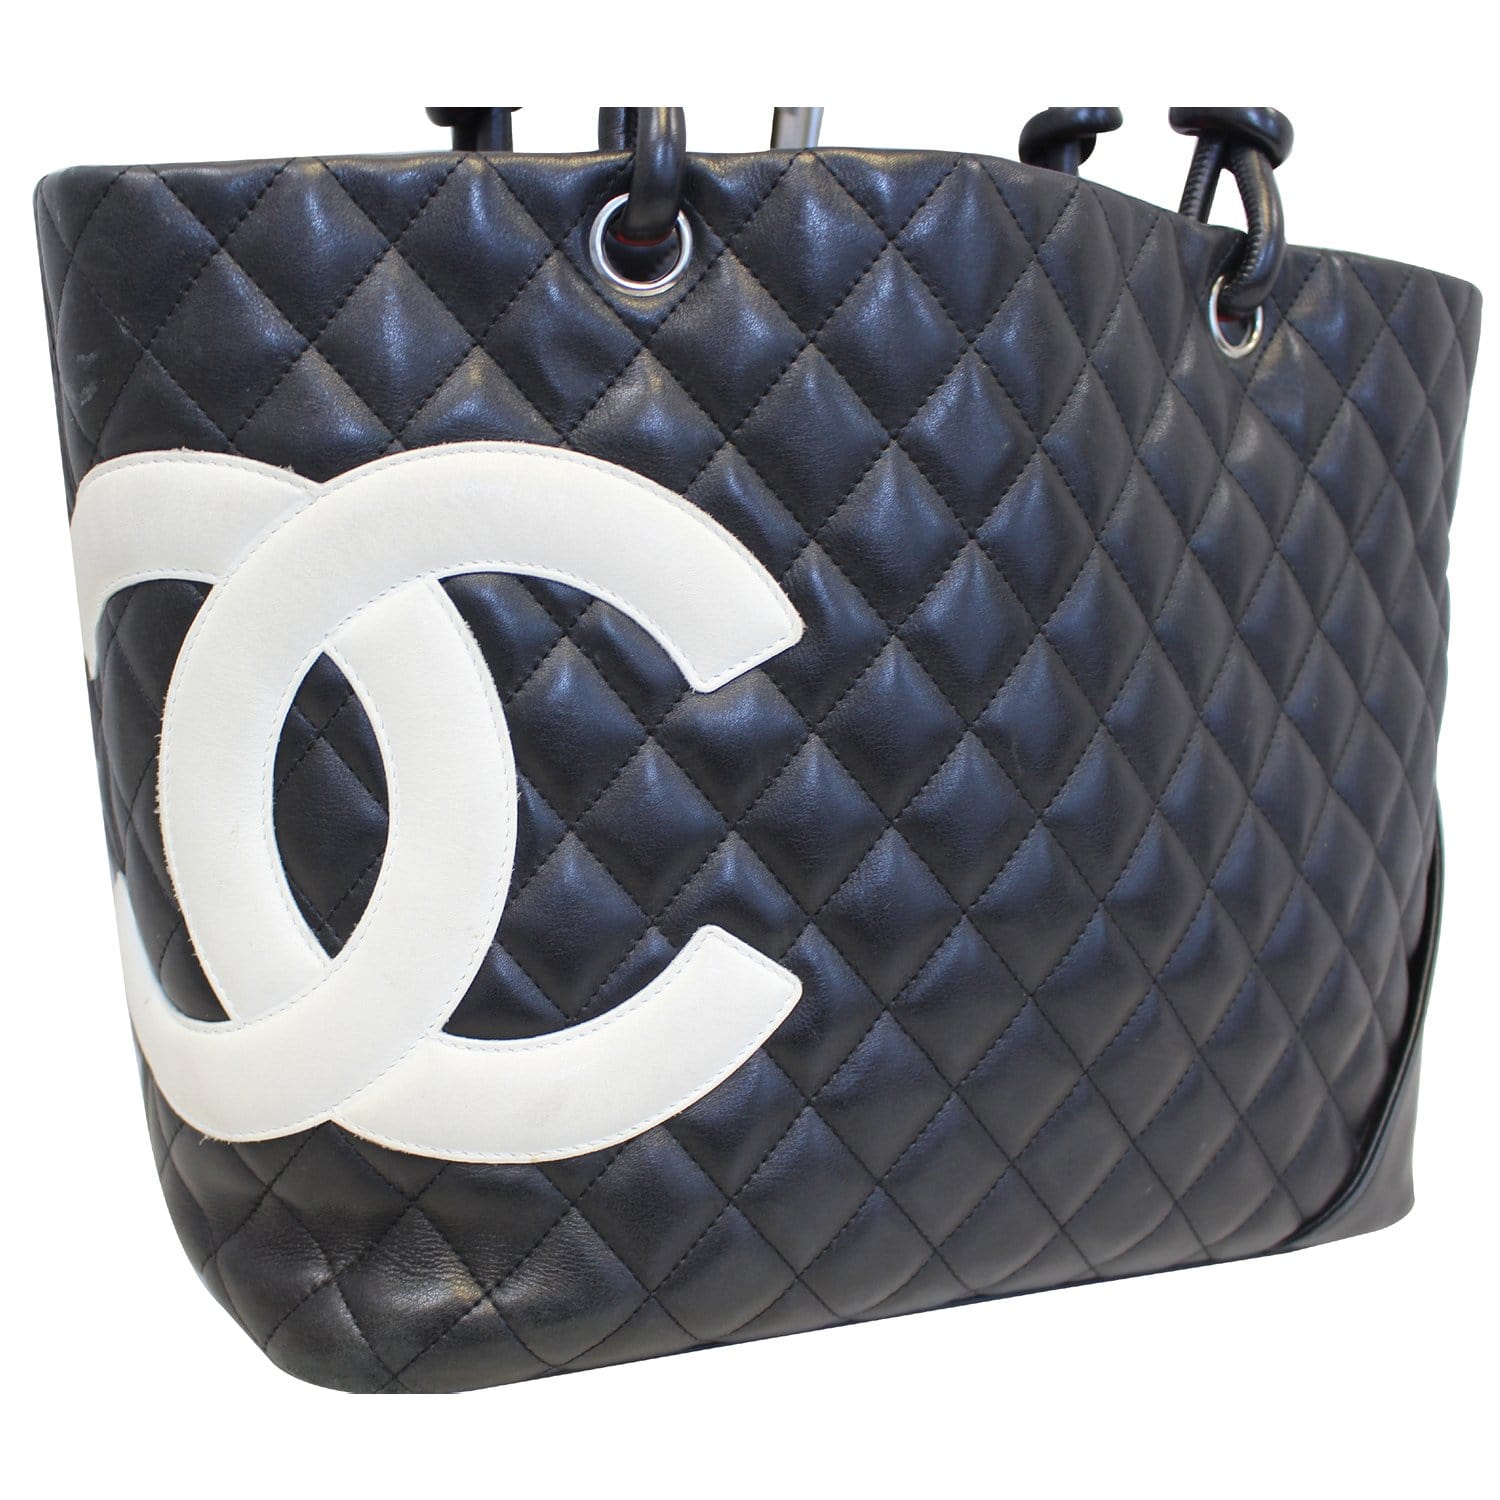 CHANEL LARGE Tote Bag in Black Leather Embroidered 31 Rue -  Israel